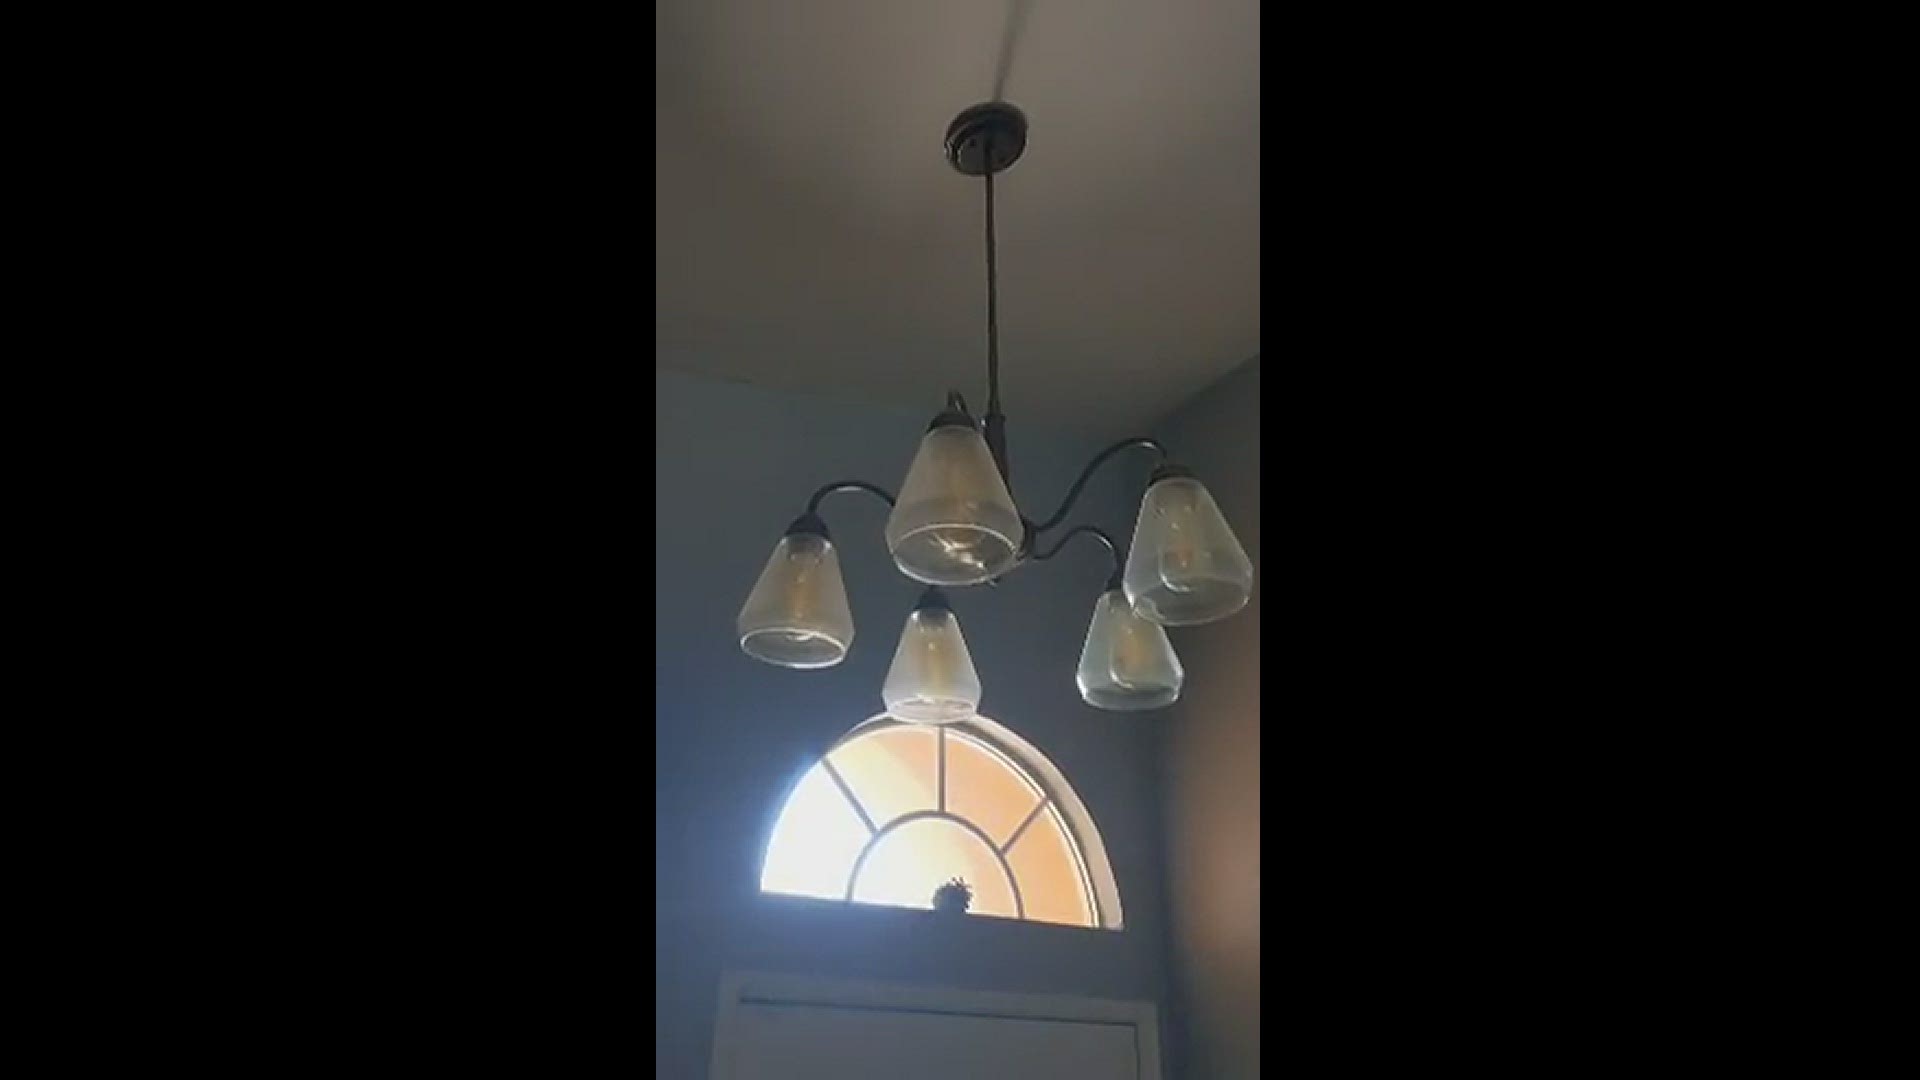 Earthquake chandelier shakes in Tracy.